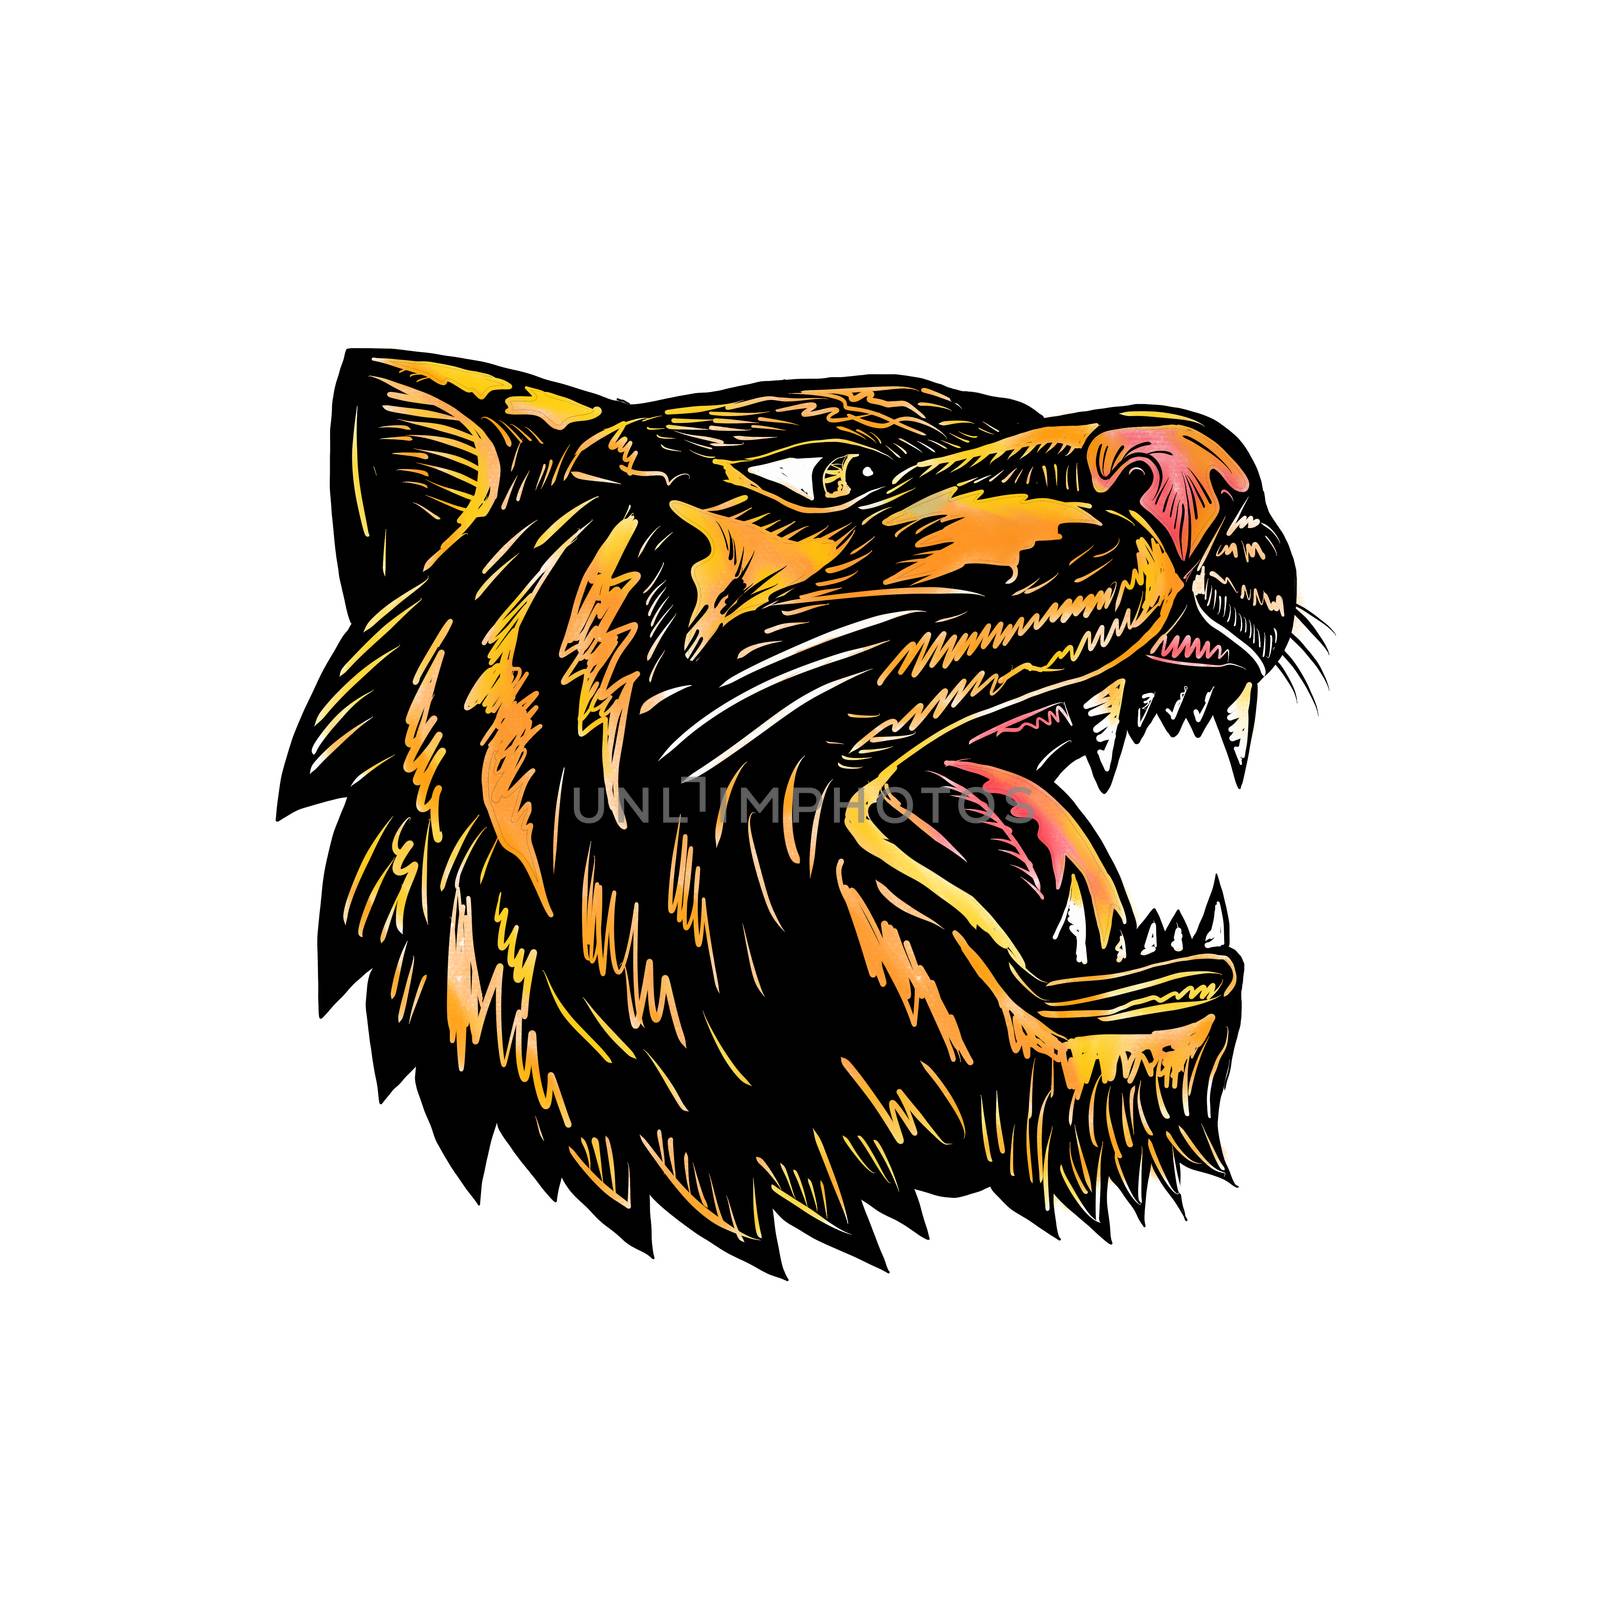 Woodcut style illustration of an angry growling tiger head viewed from side on isolated background.